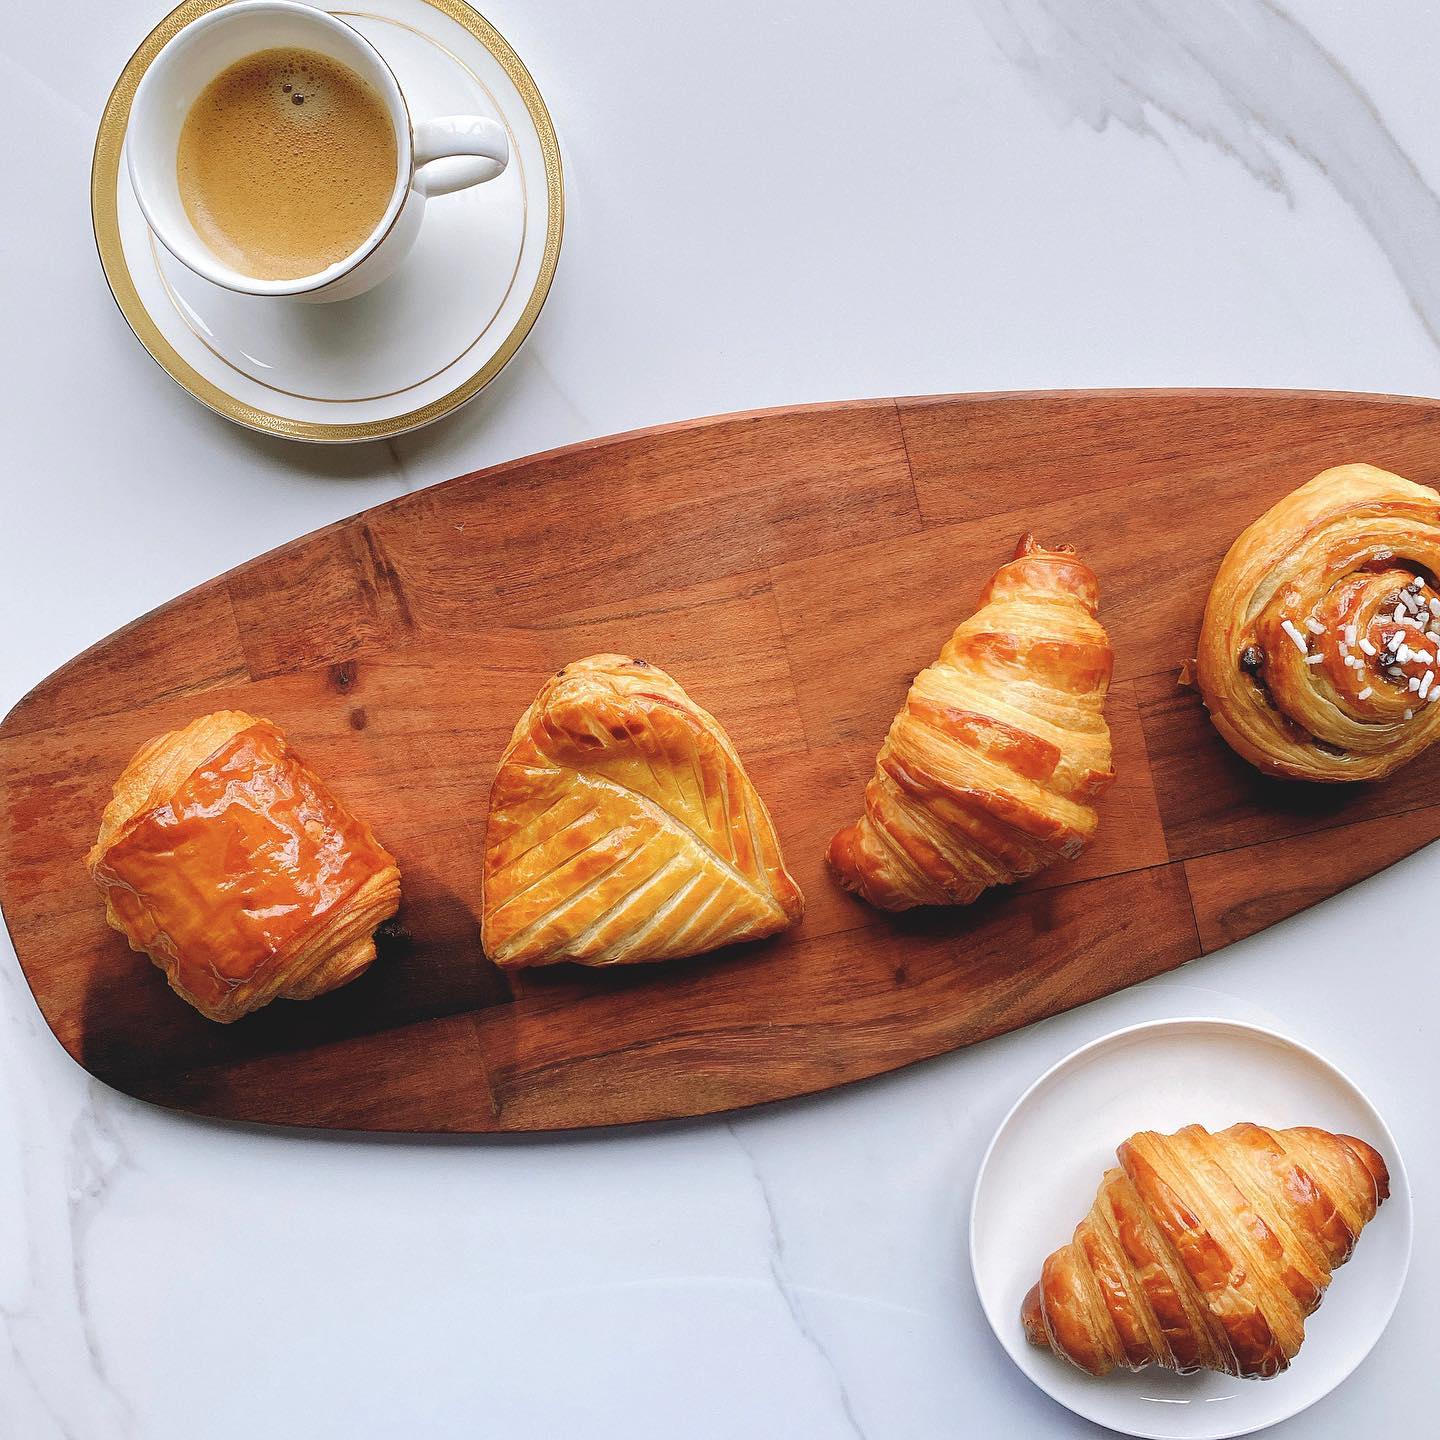 Finest French Assorted Pastry Delivery , Breakfast Pastry Box, Croissant ,Pain au Chocolat , Apple Cream Cheese, Almond Crossant, Pain Au Raisin, Canele De Bordeaux, Breakfast Pastry Set Delivery, Artisan Bakery Patisserie KL - Little Black Pastry Box 